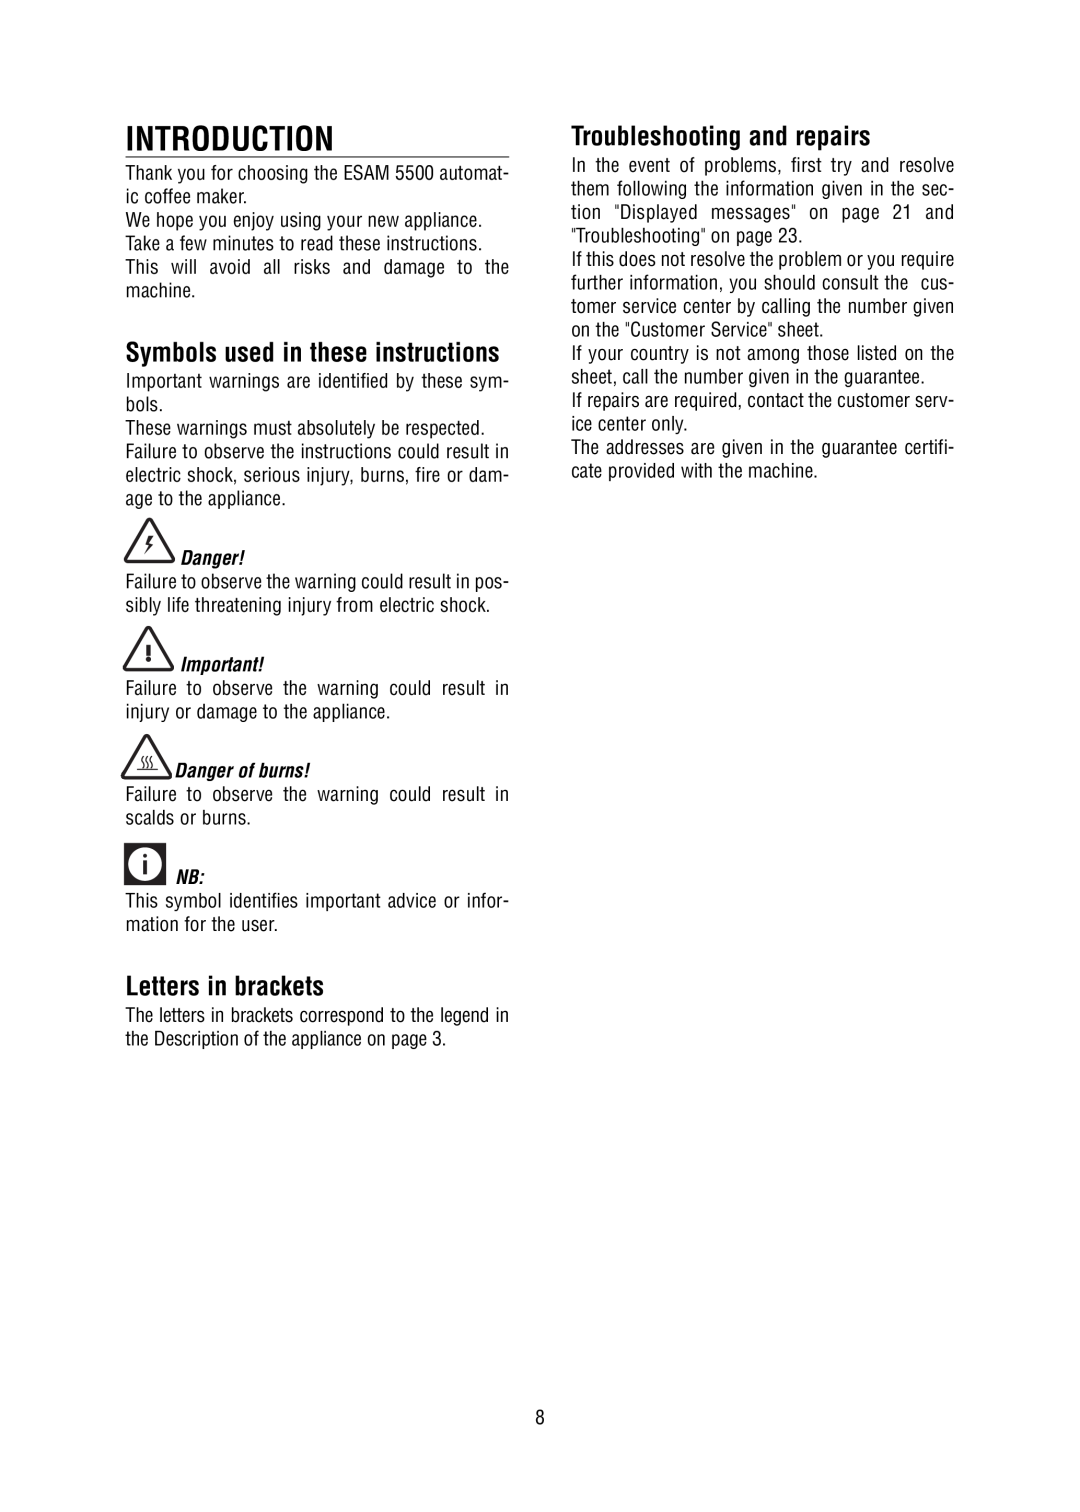 DeLonghi ESAM5500.N Introduction, Symbols used in these instructions, Letters in brackets, Troubleshooting and repairs 